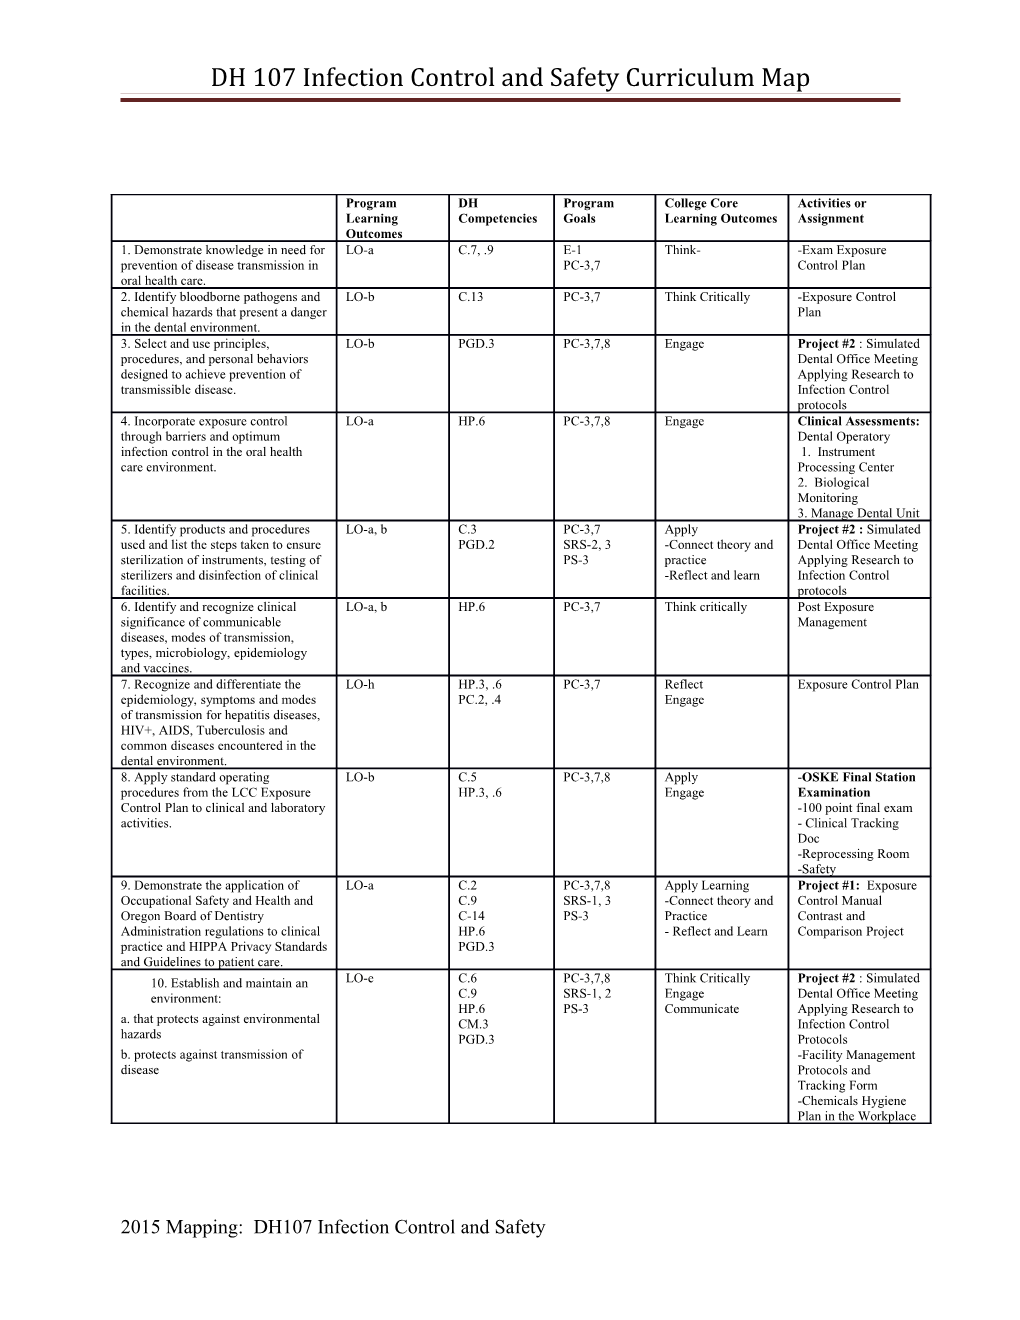 DH 107 Infection Control and Safety Curriculum Map